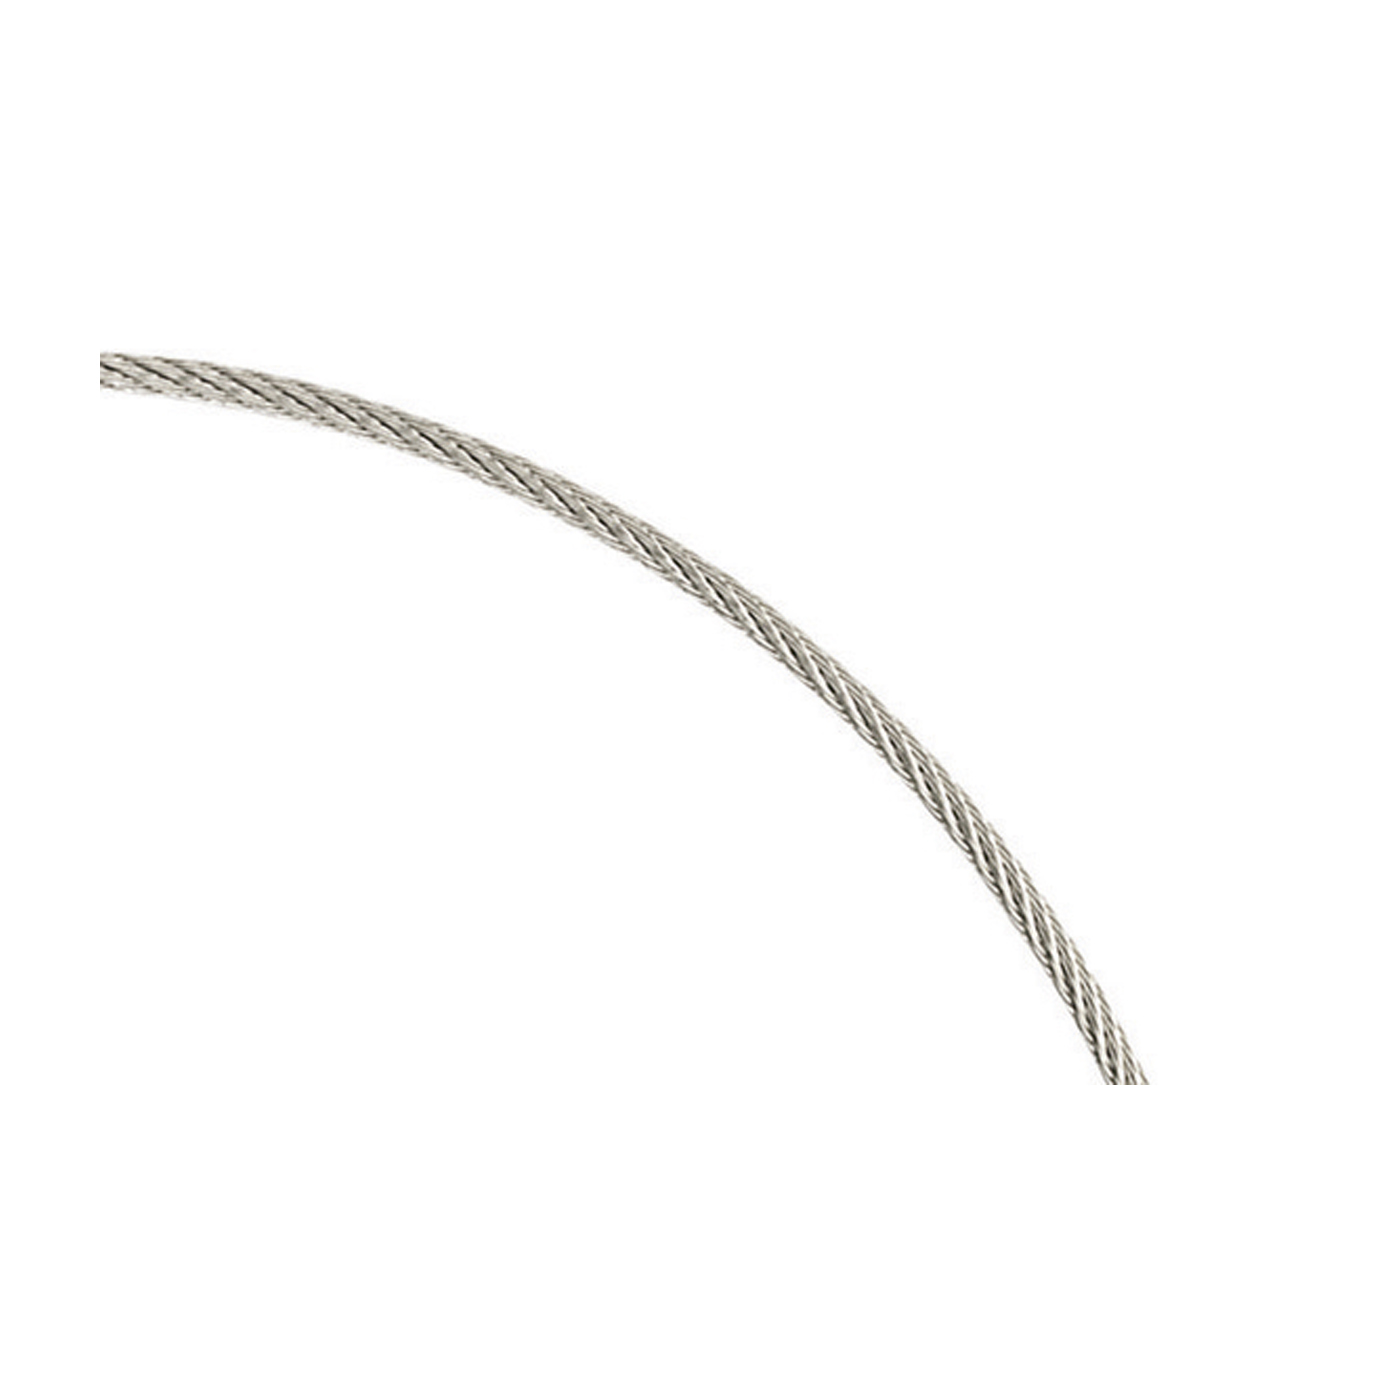 Steel Cable Neck Wire, ø 0.90 mm, 45 cm - 1 piece